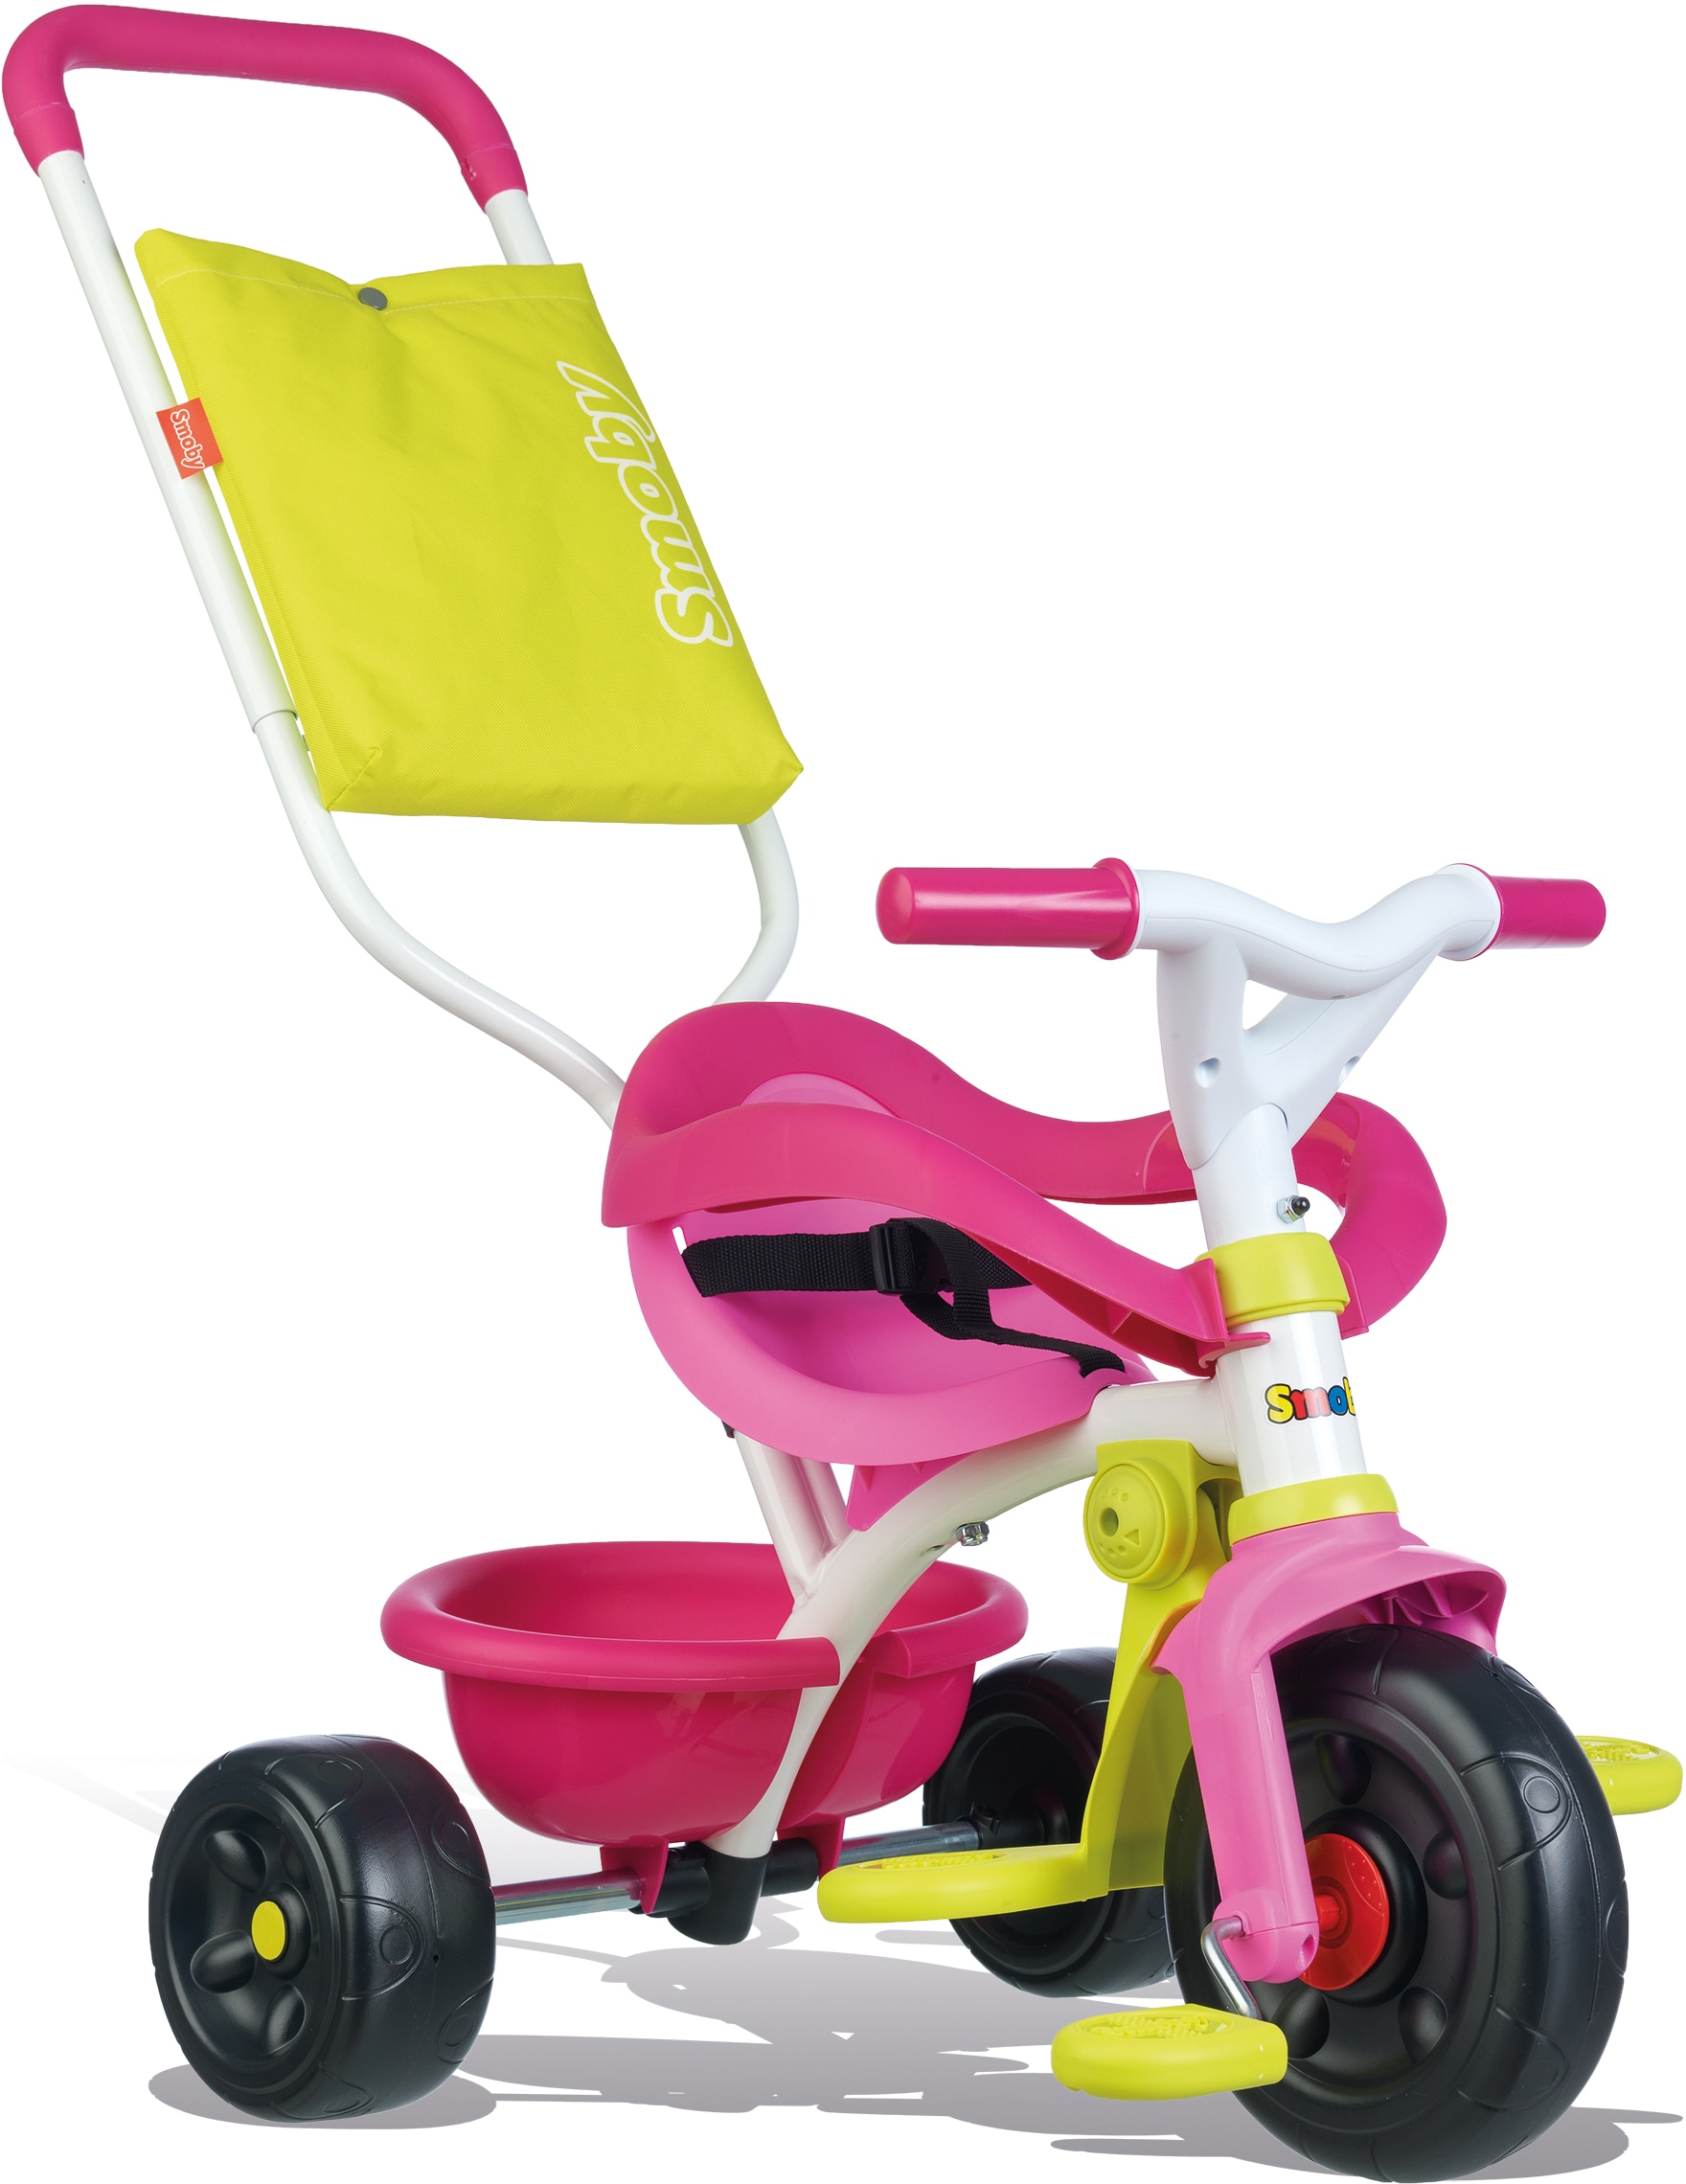 Smoby Dreirad »Be Fun Komfort, rosa«, Made in Europe bequem kaufen